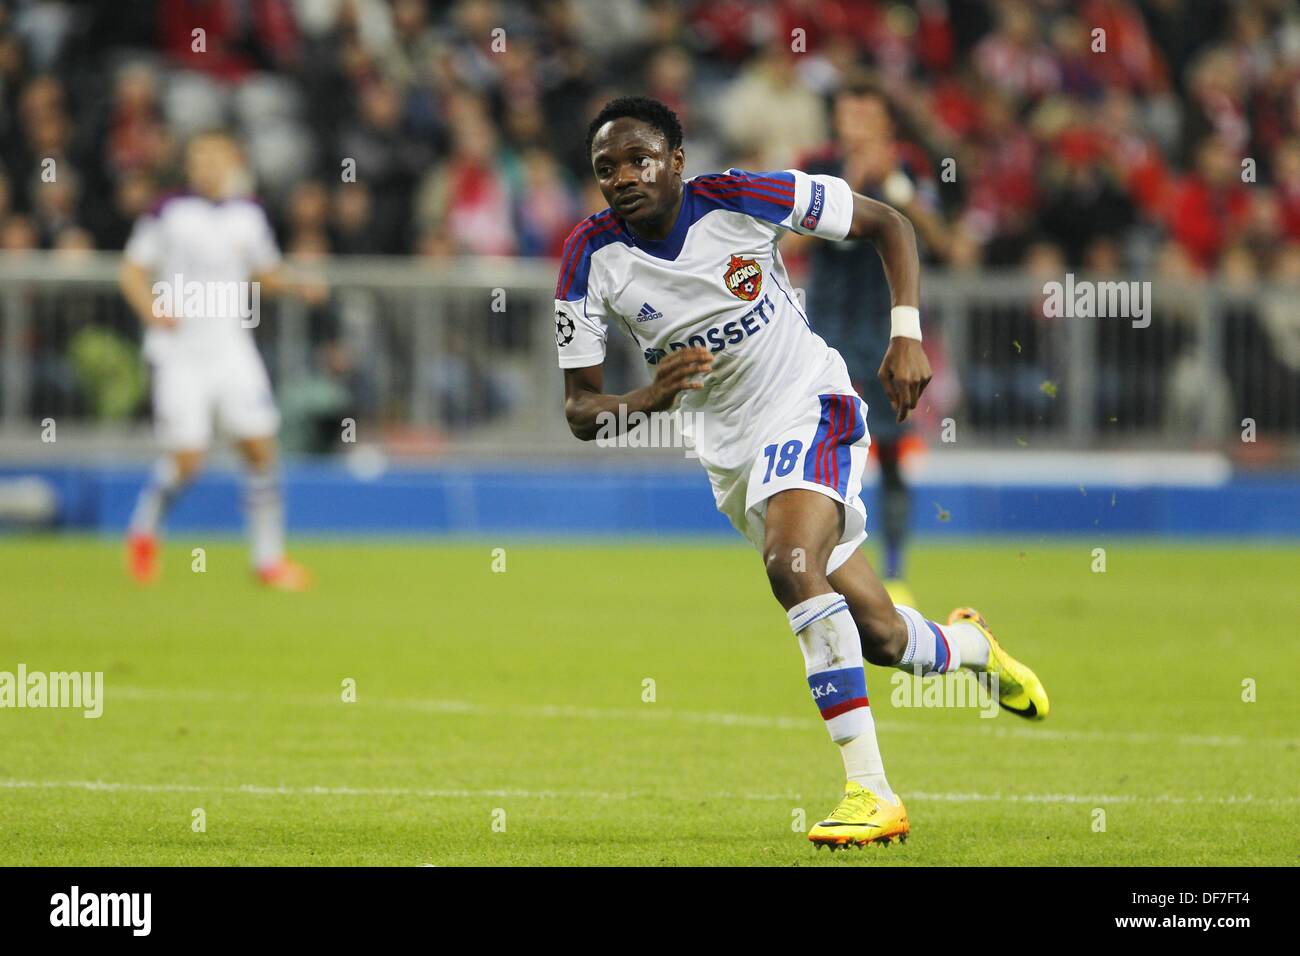 Ahmed Musa (CSKA Moscow), SEPTEMBER 17, 2013 - Football / Soccer : UEFA Champions League match between Bayern Munchen and CSKA Moscow at the Allianz Arena in Munich, Germany, September 17, 2013. (Photo by AFLO) Stock Photo